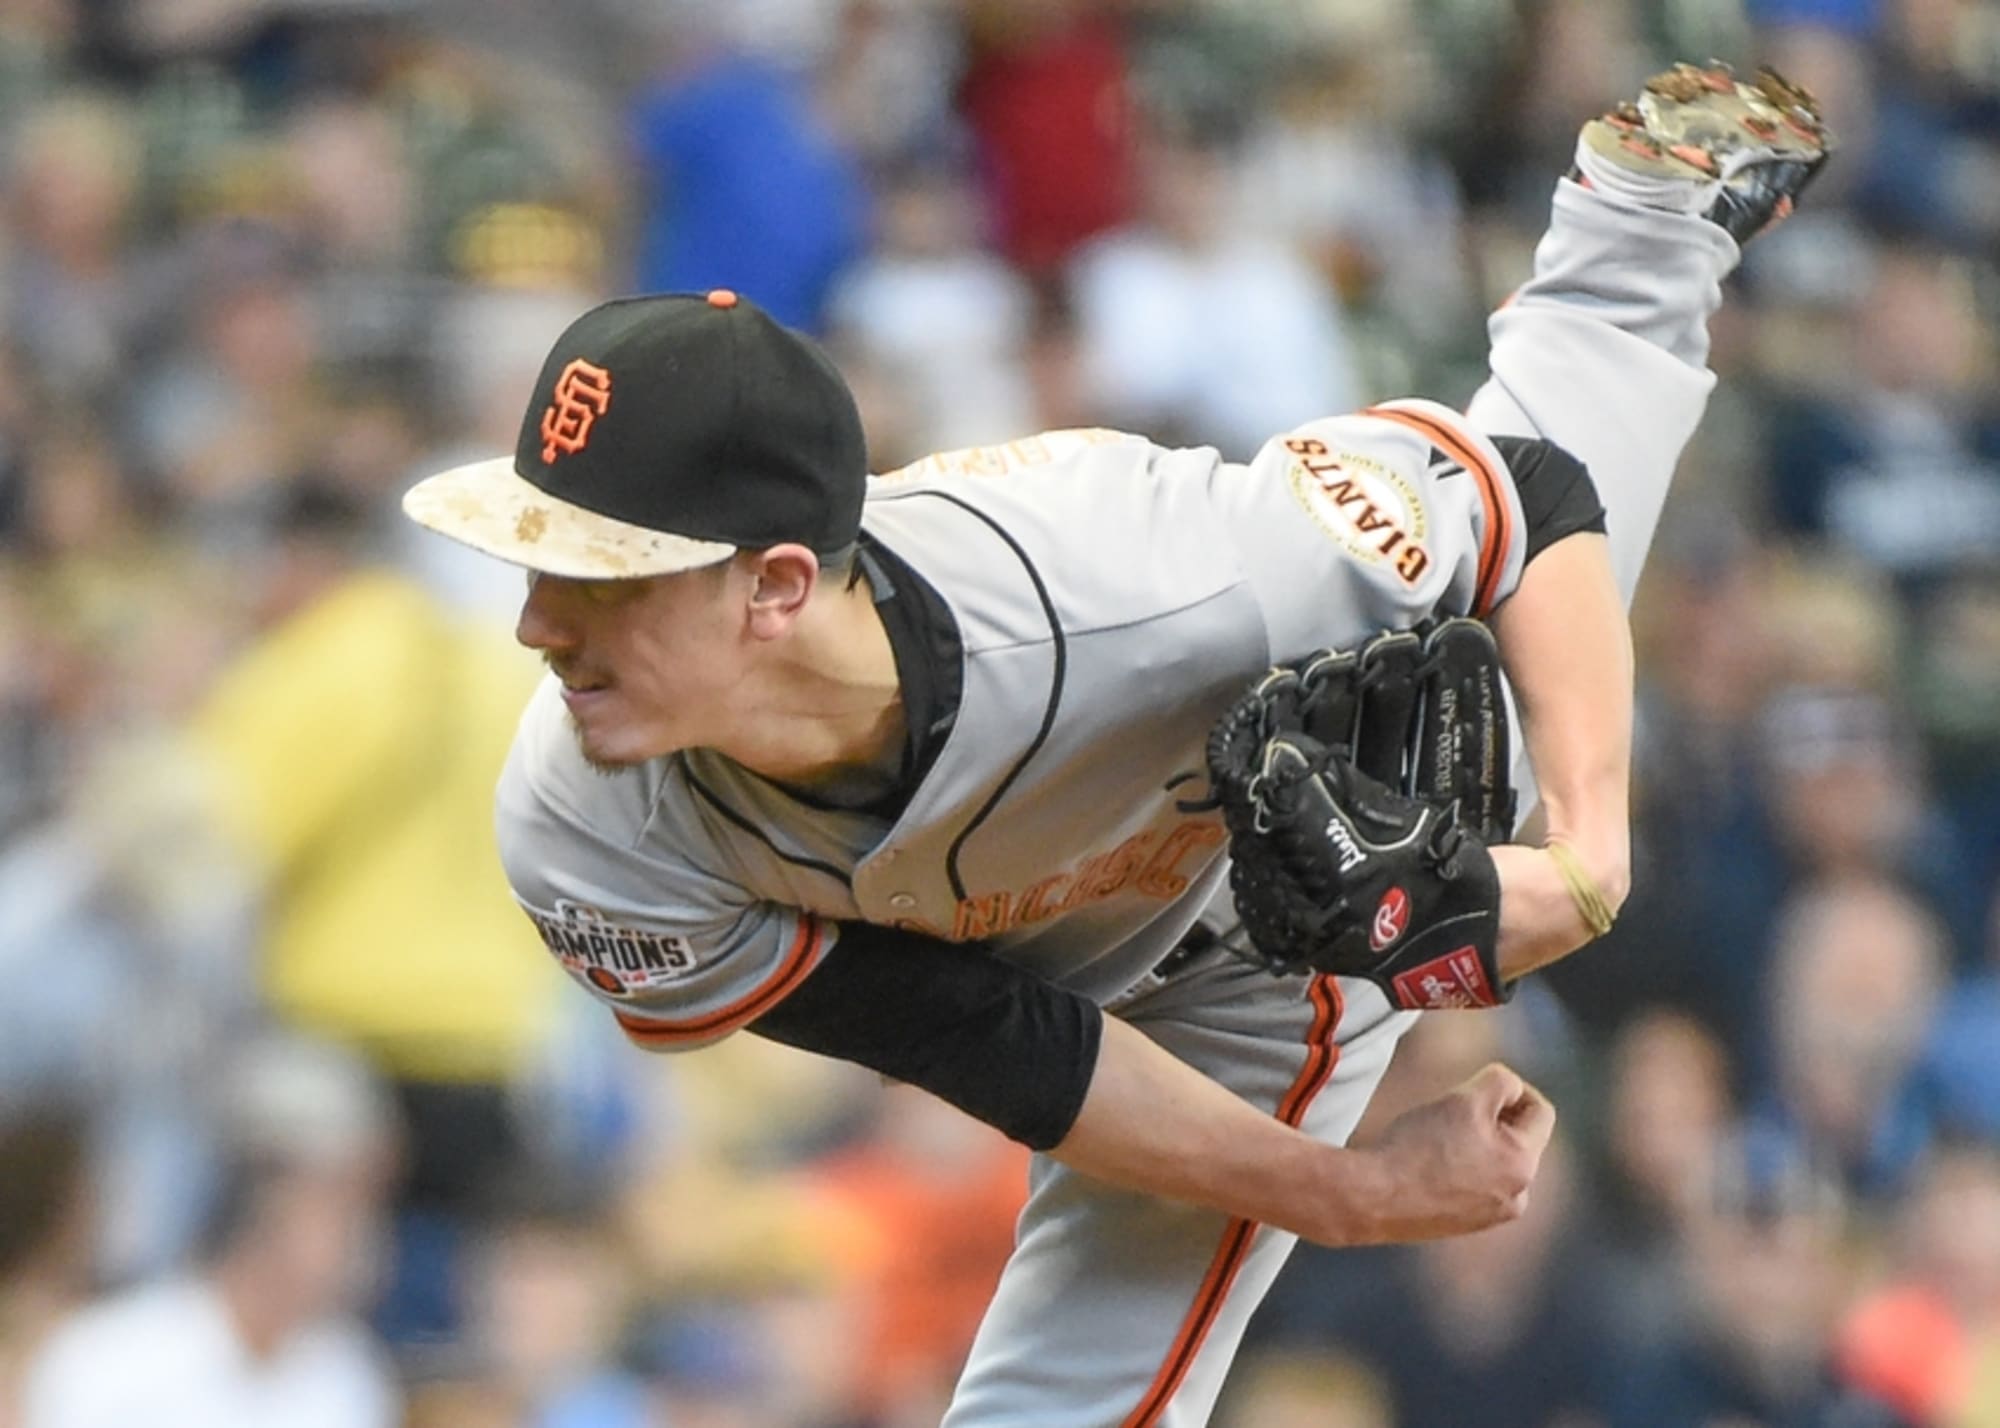 Tim Lincecum was a FREAK on the mound! Lincecum was so nasty during his  career 